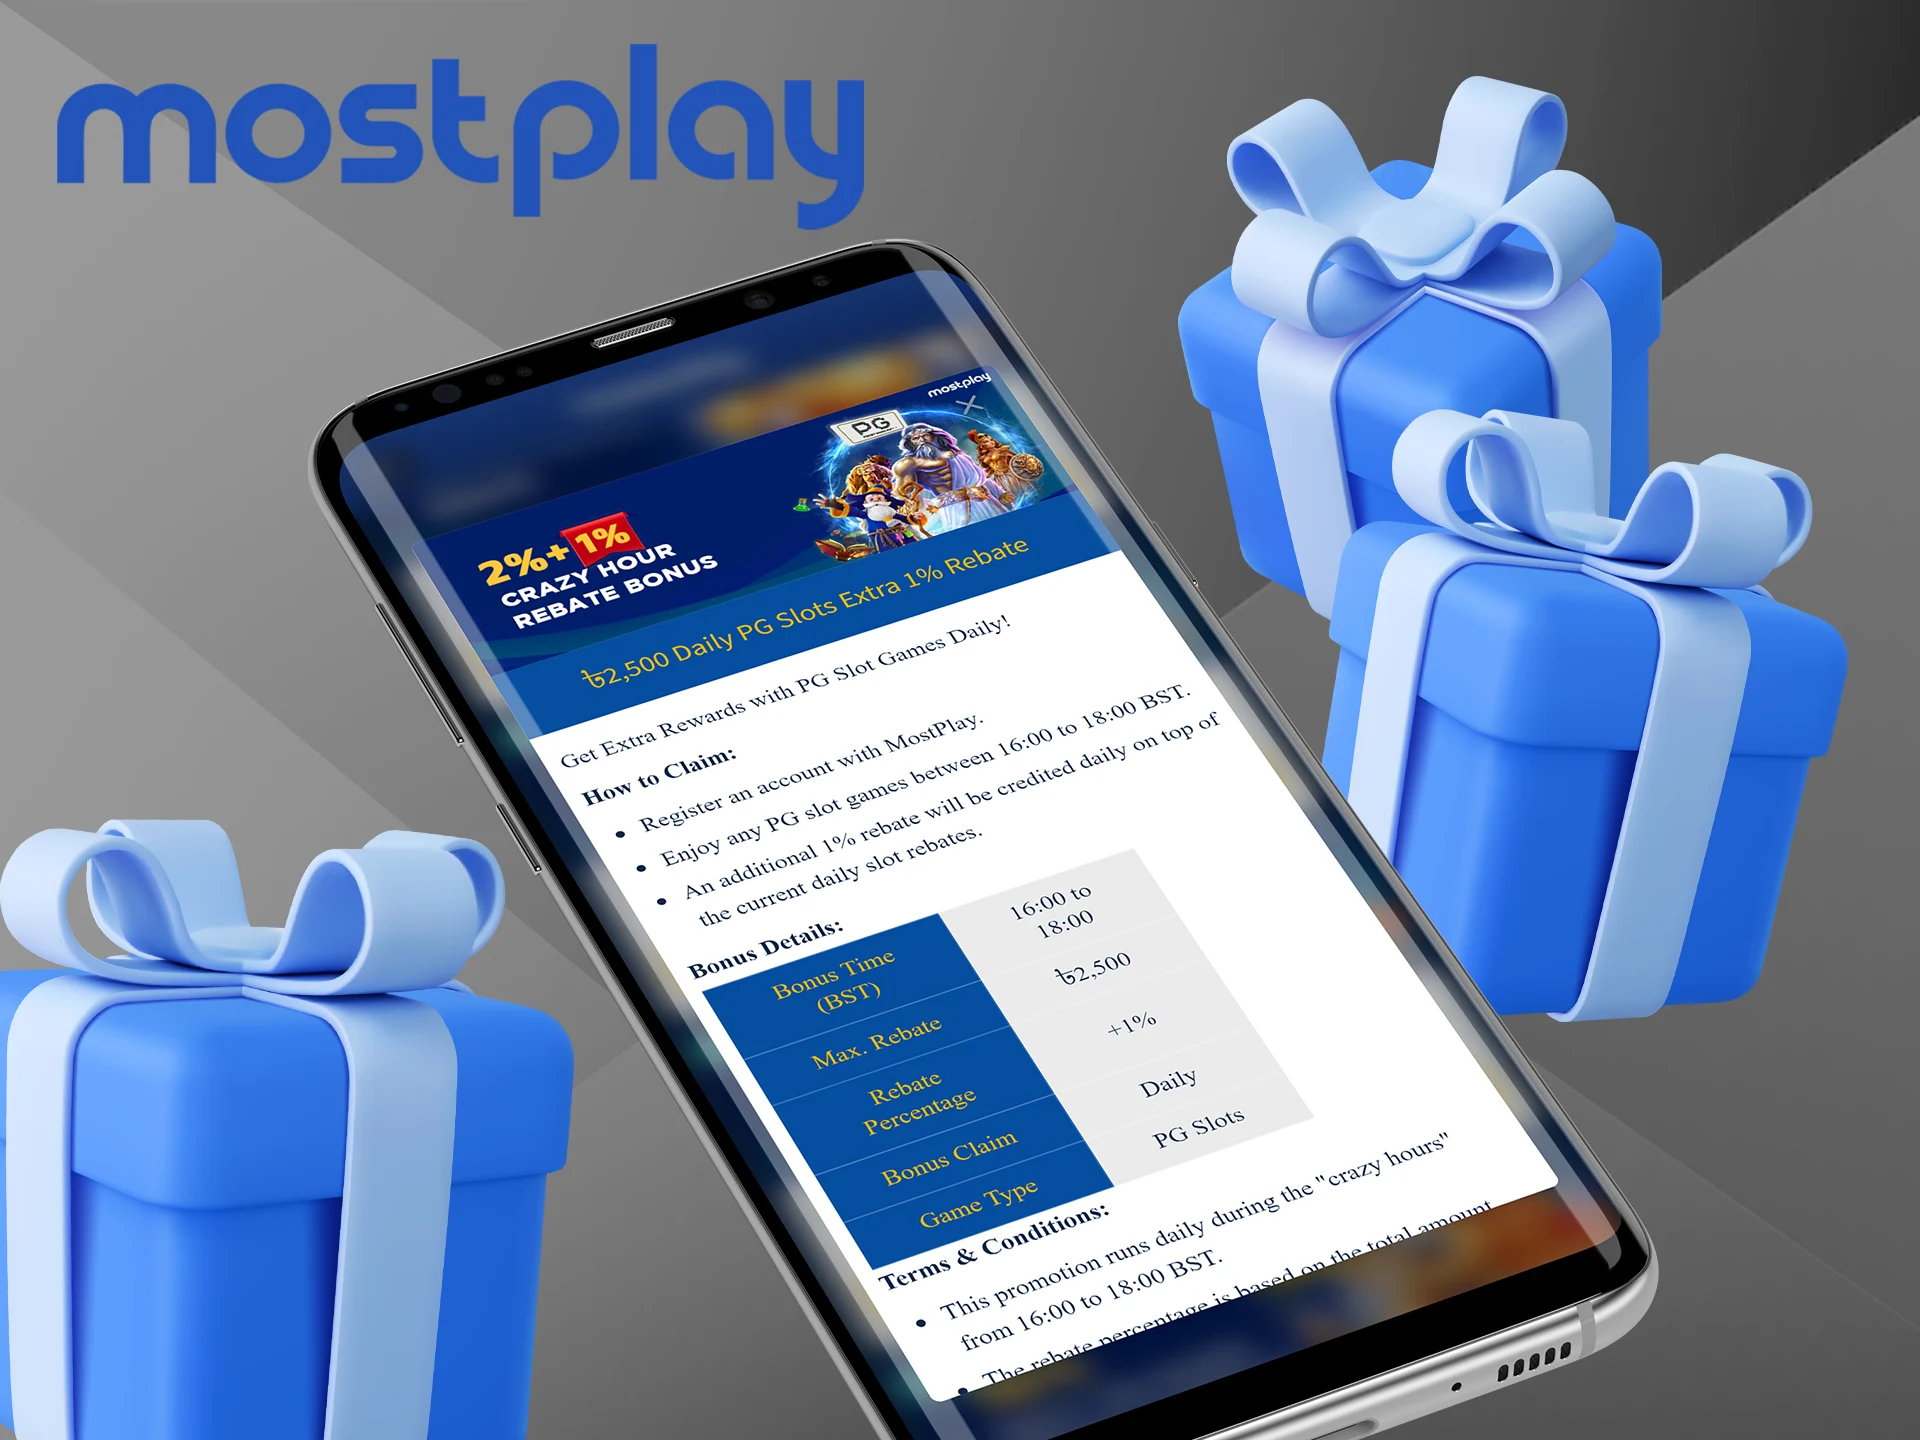 Read the terms and conditions to get slots extra rebate at Mostplay.